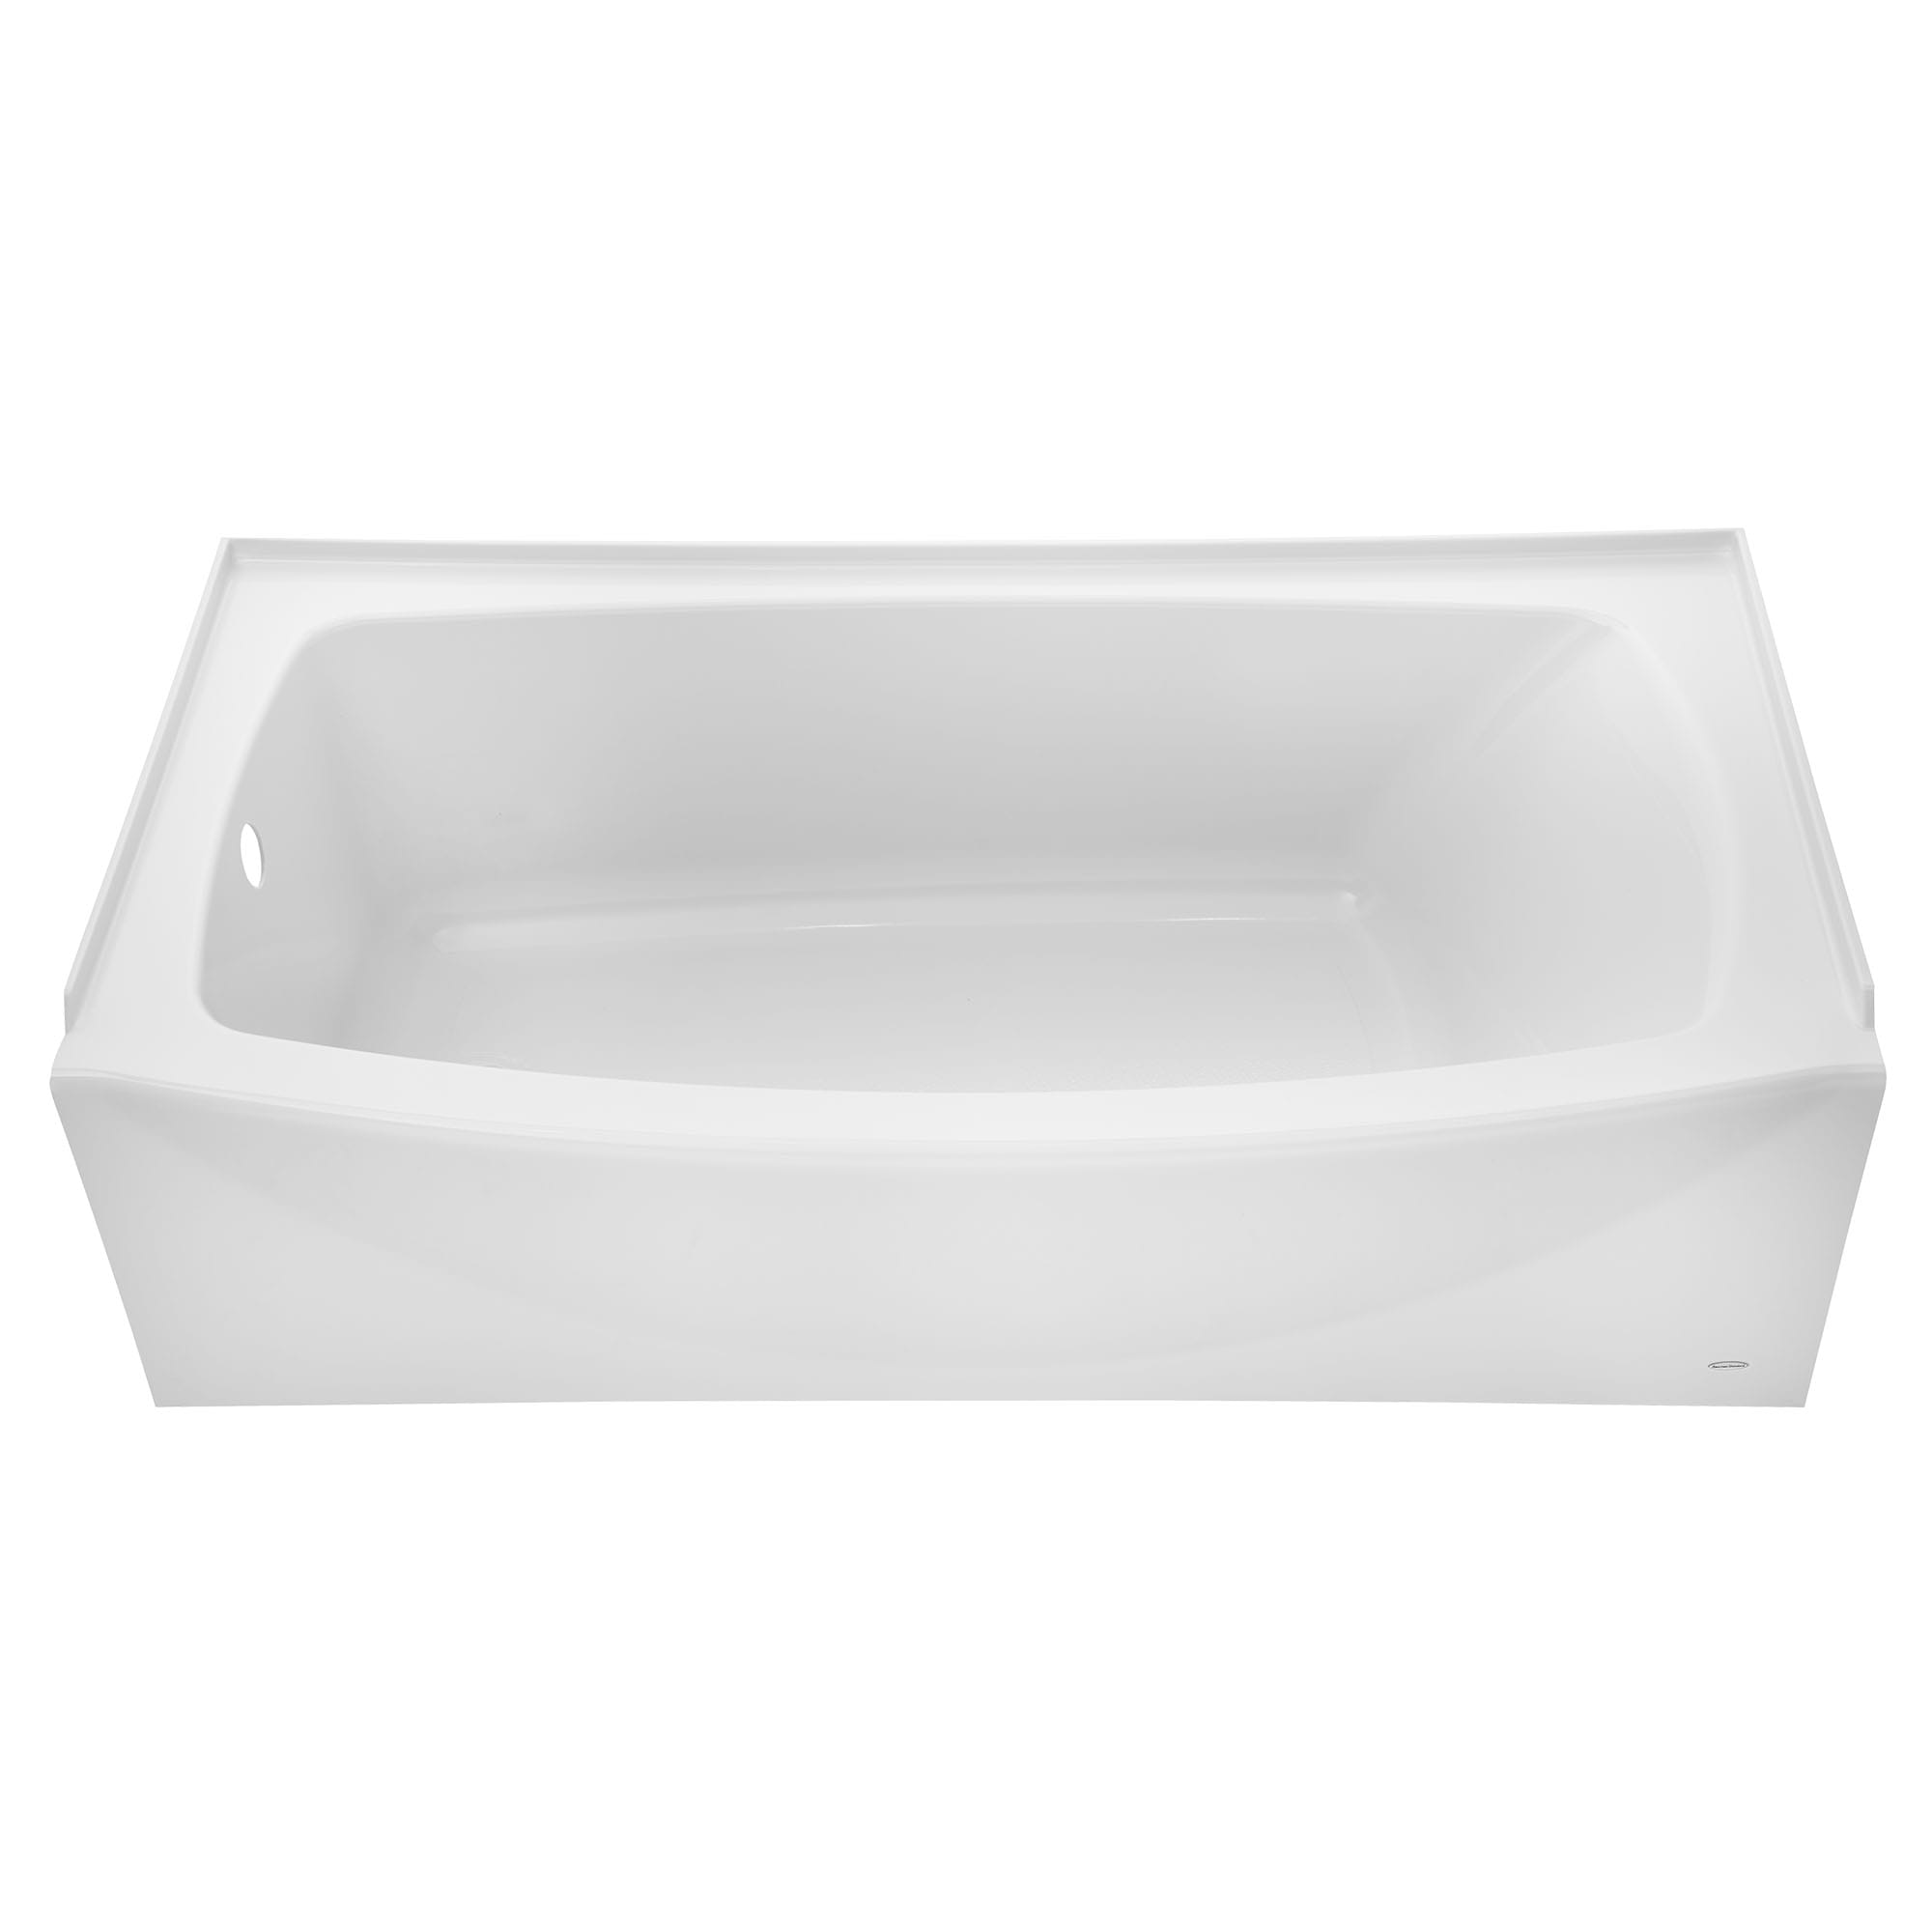 Ovation 60 x 30-Inch Integral Apron Bathtub Right-Hand Outlet